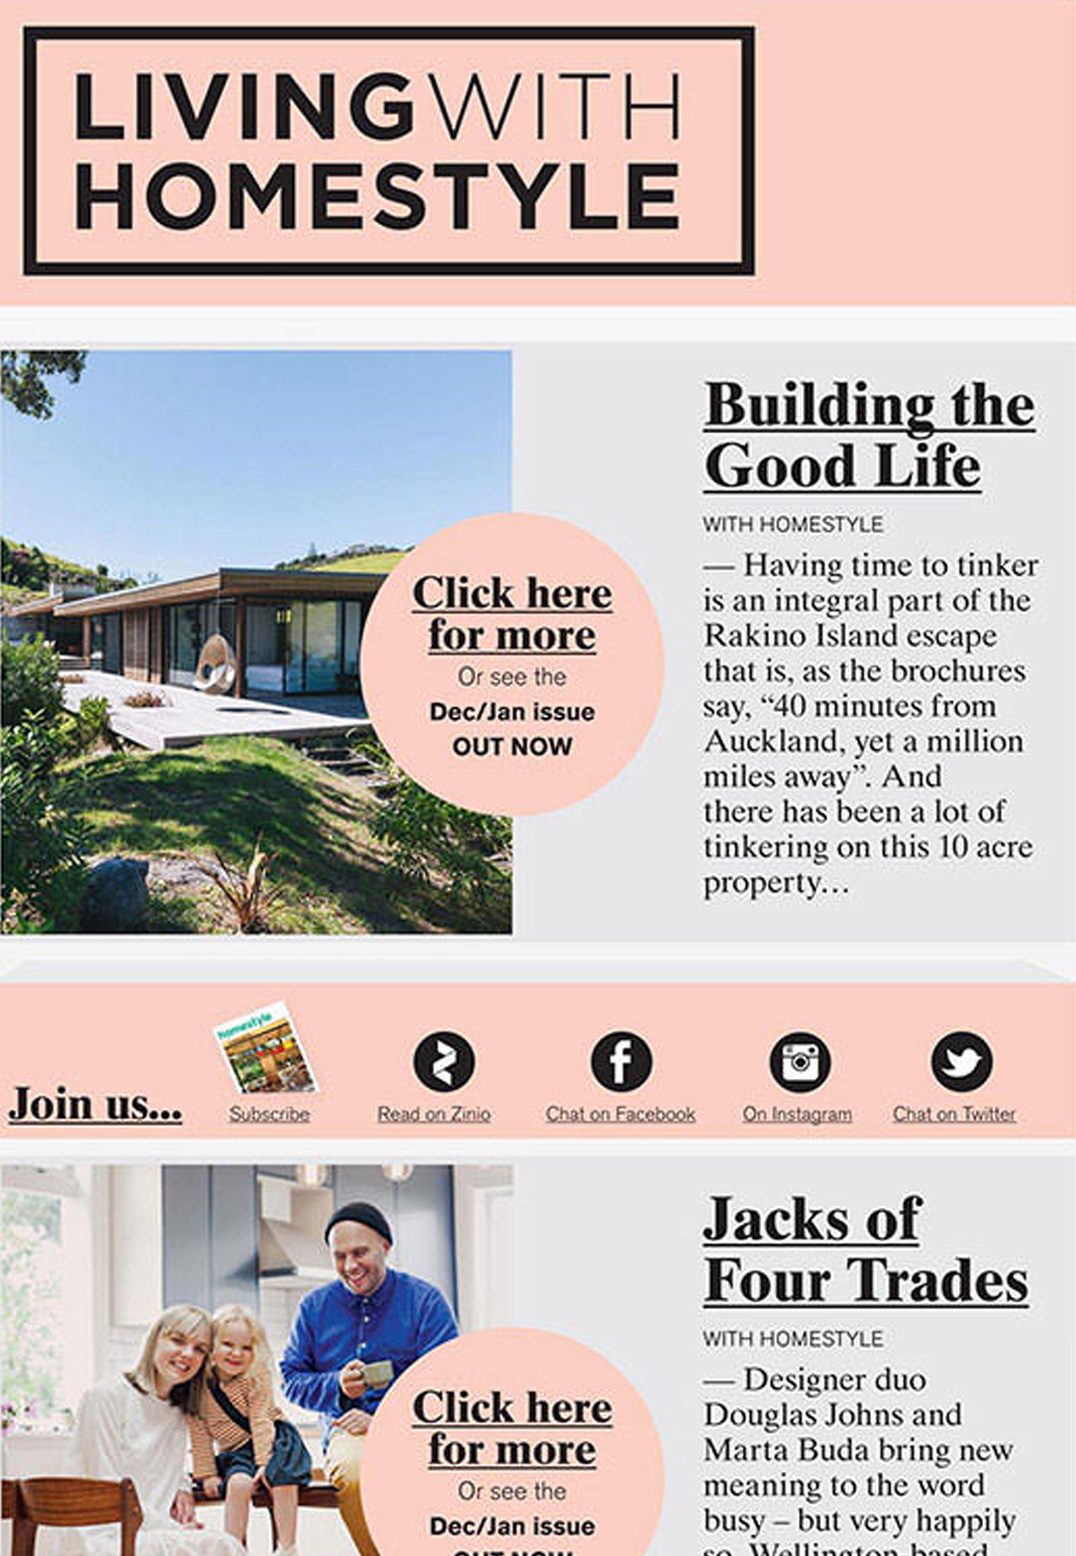 Living with Homestyle uses a simple template with many opportunities to encourage further engagement with its content.